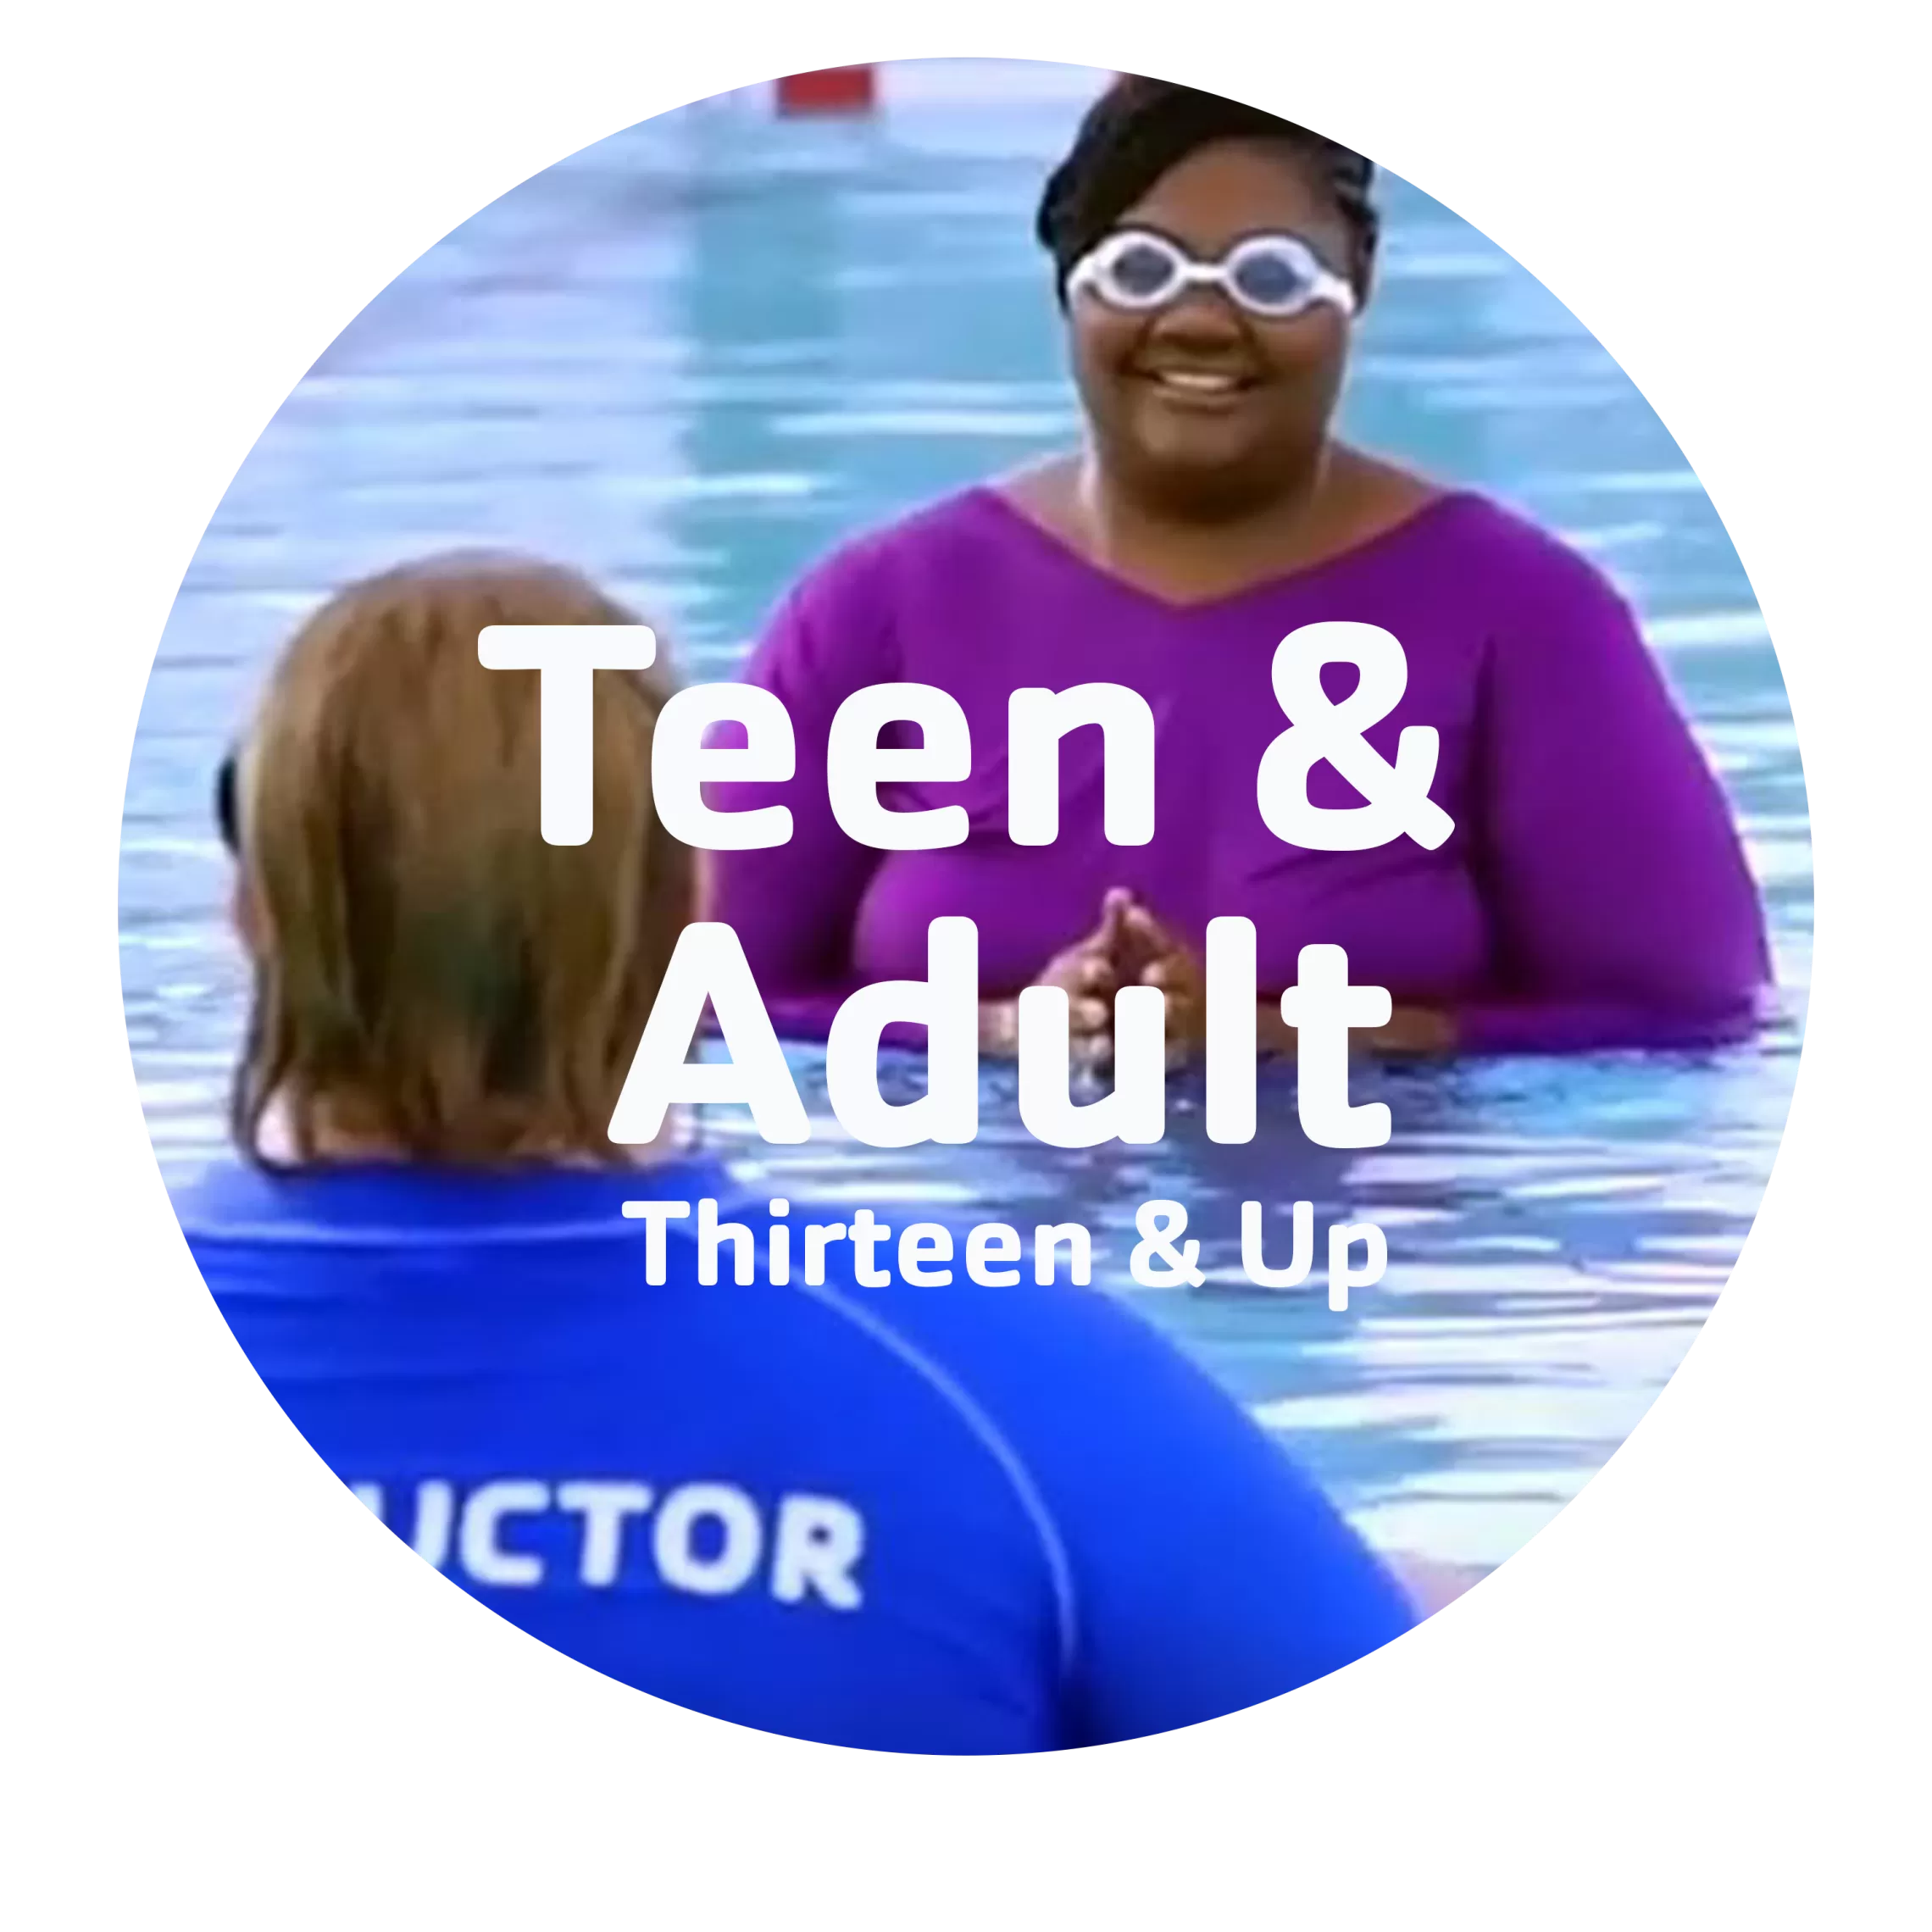 teen and adult age swim assessment ages thirteen plus—click to learn more